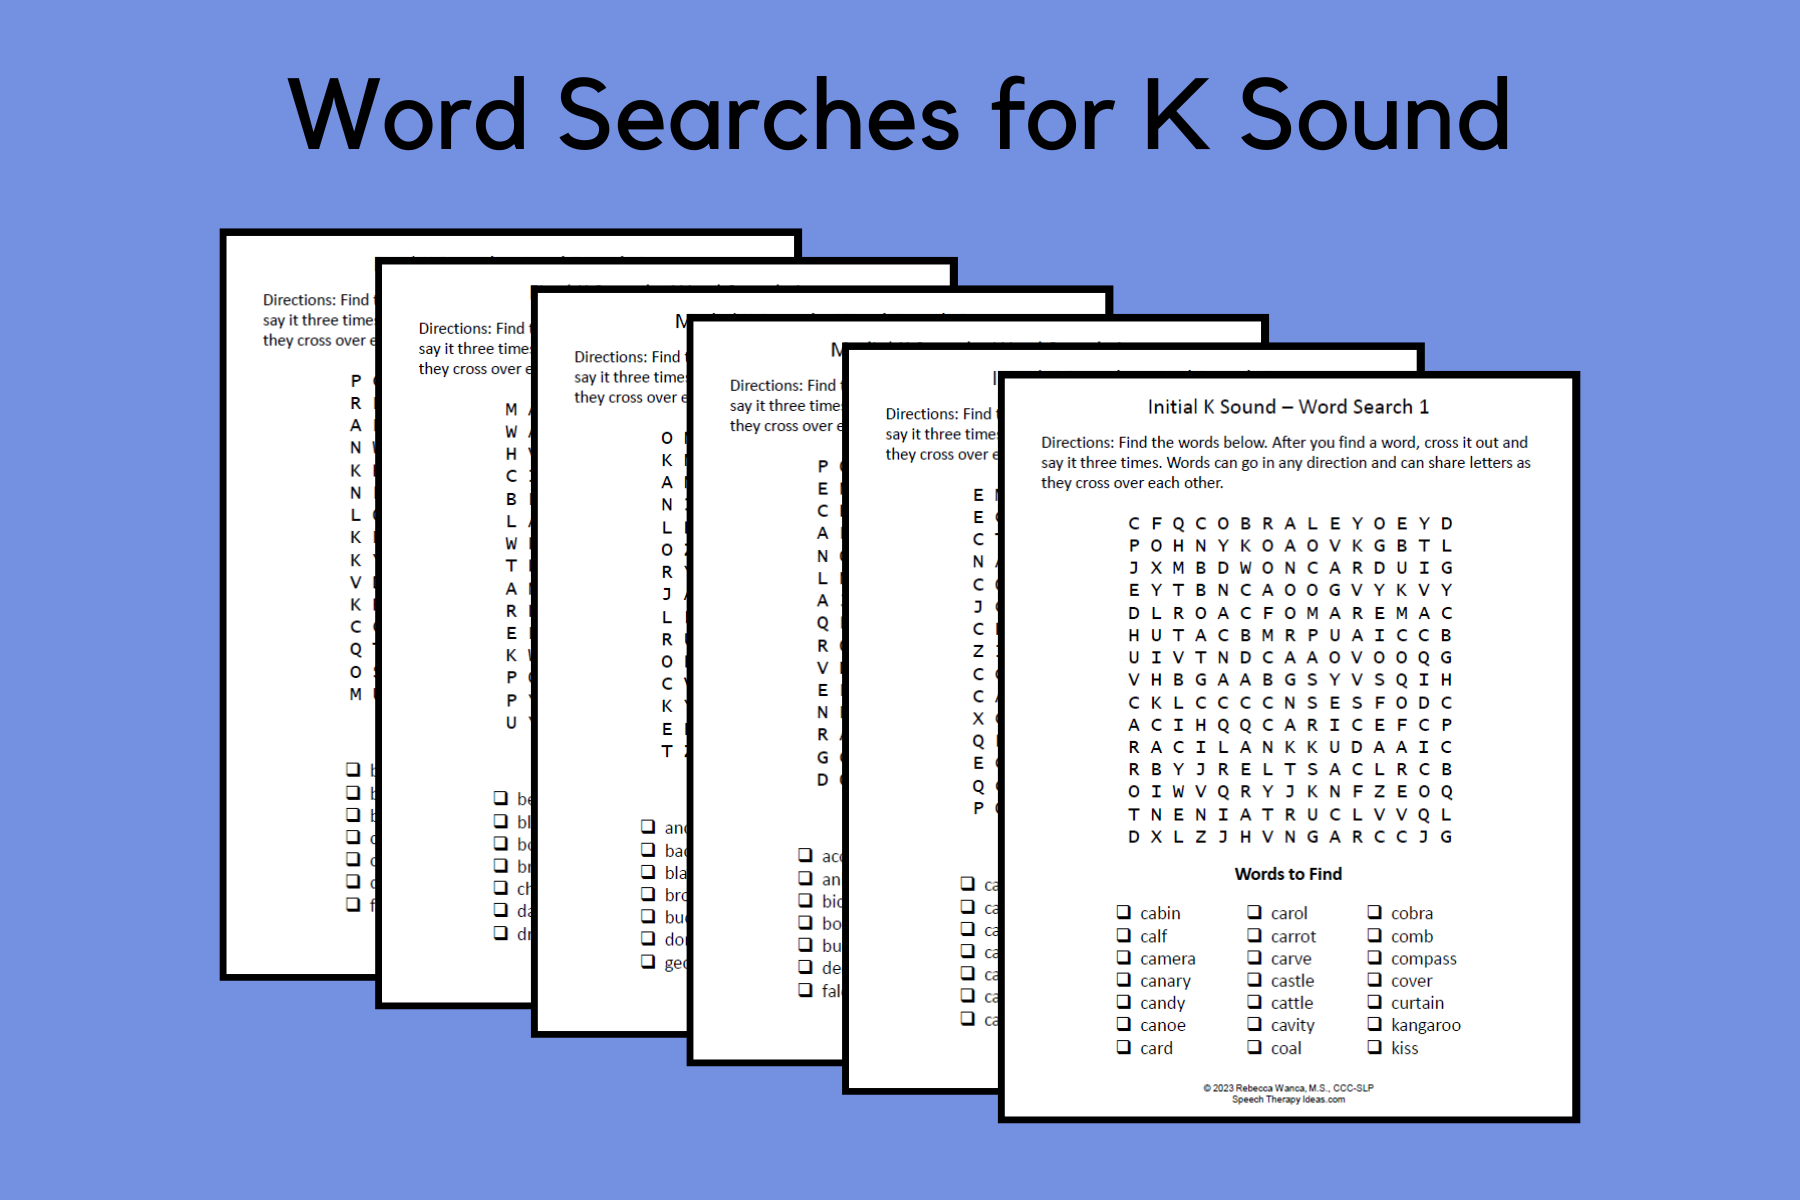 Word Searches for K Sound